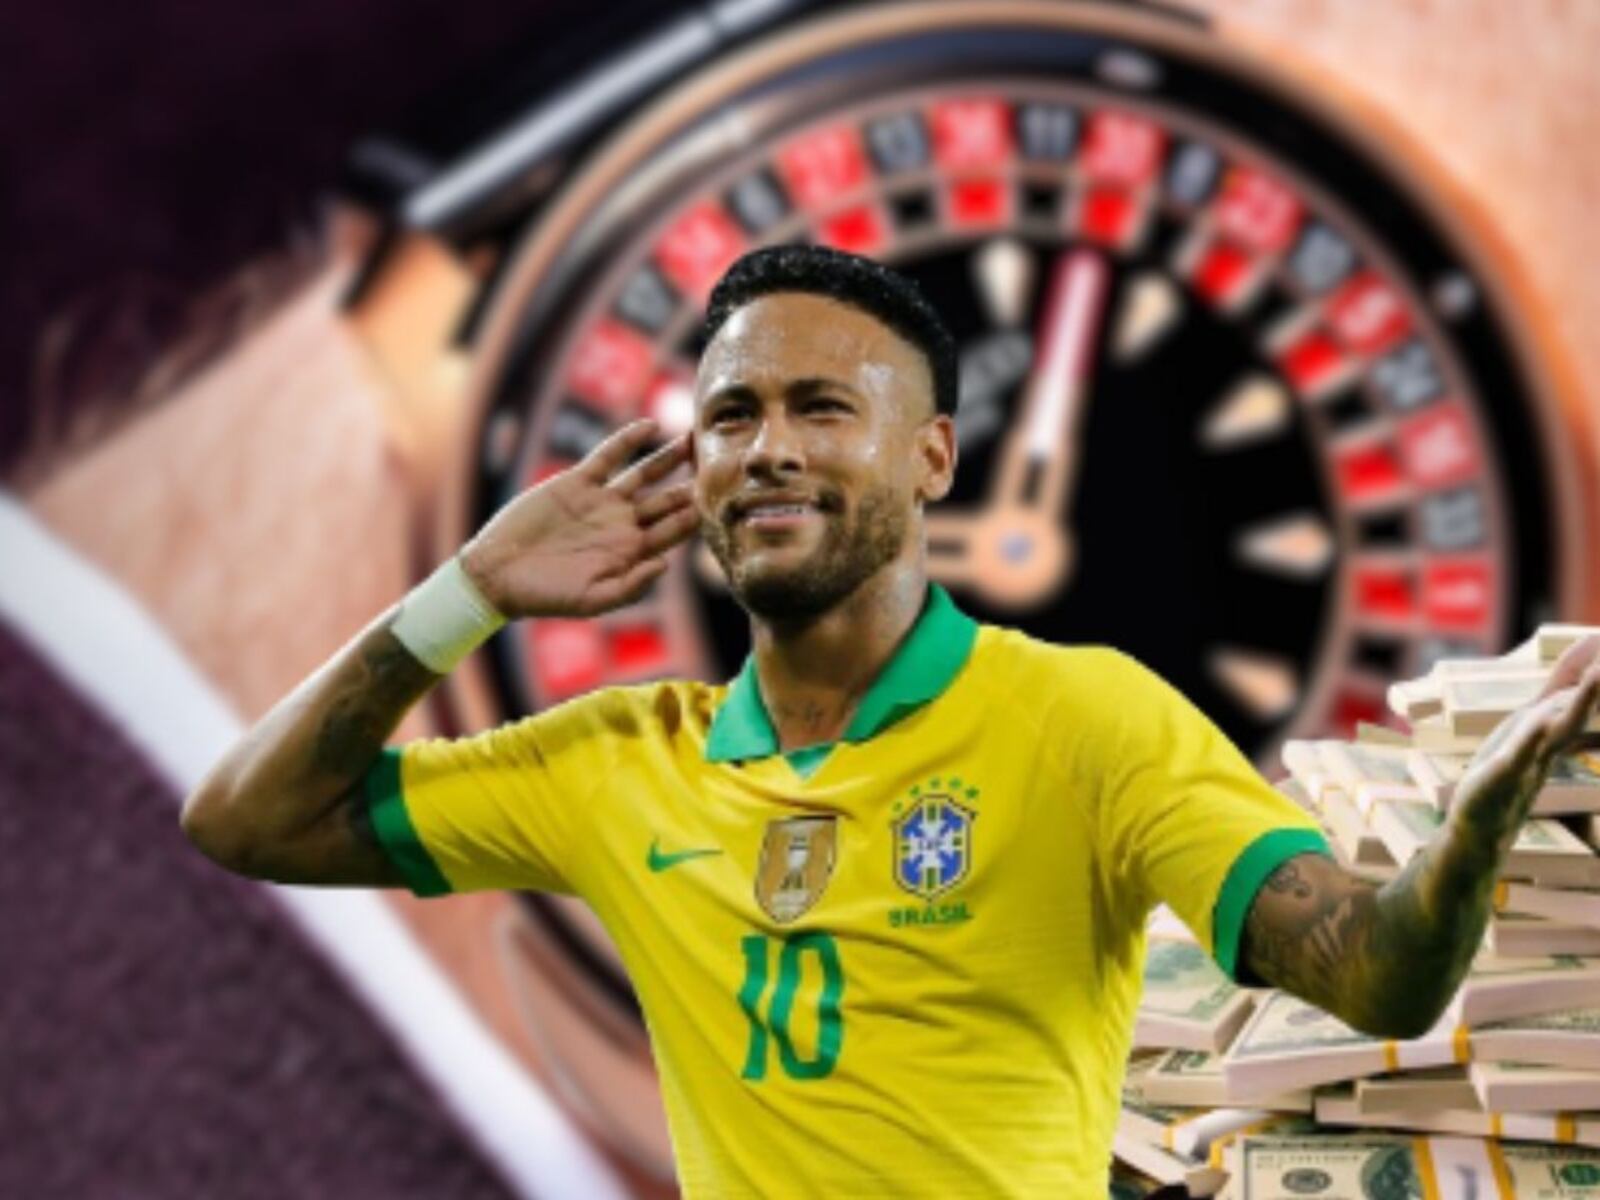 He still out of soccer, but the exclusive watch of Neymar with which he plays Roulette, its millionaire cost